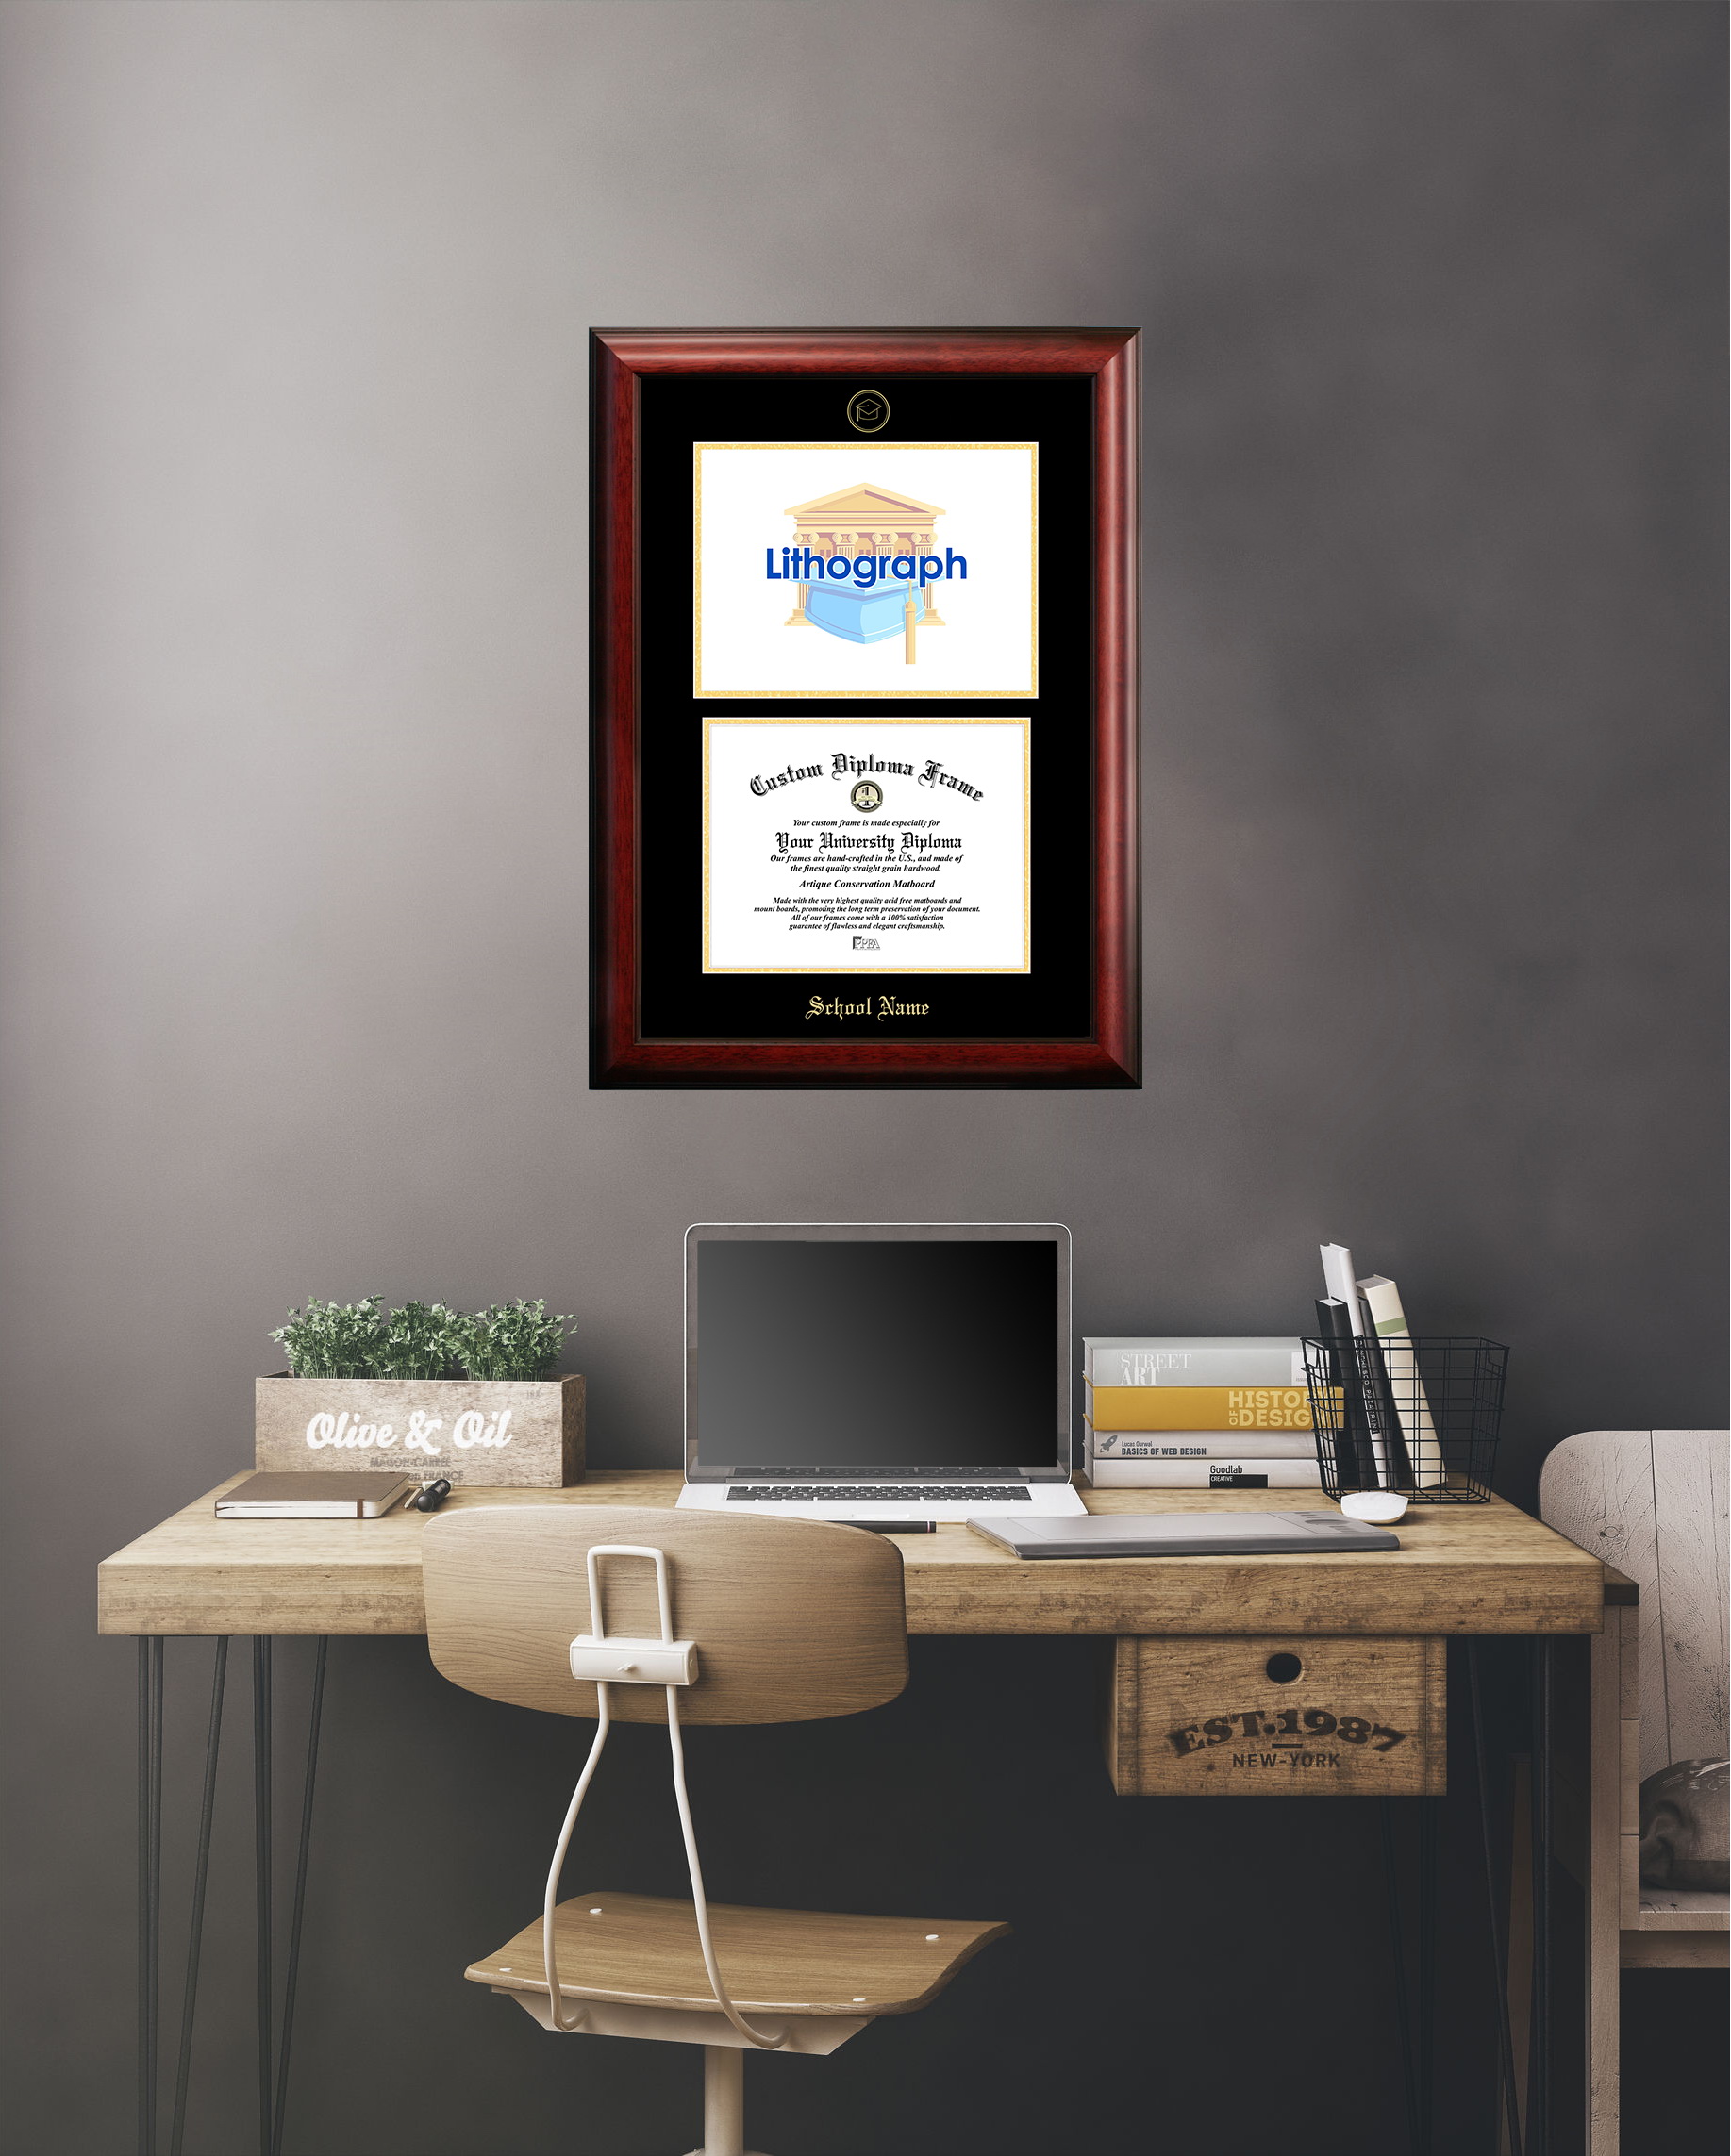 Campus Images FL986LSED-1185 Florida Atlantic University 11w x 8.5h Silver Embossed Diploma Frame with Campus Images Lithograph